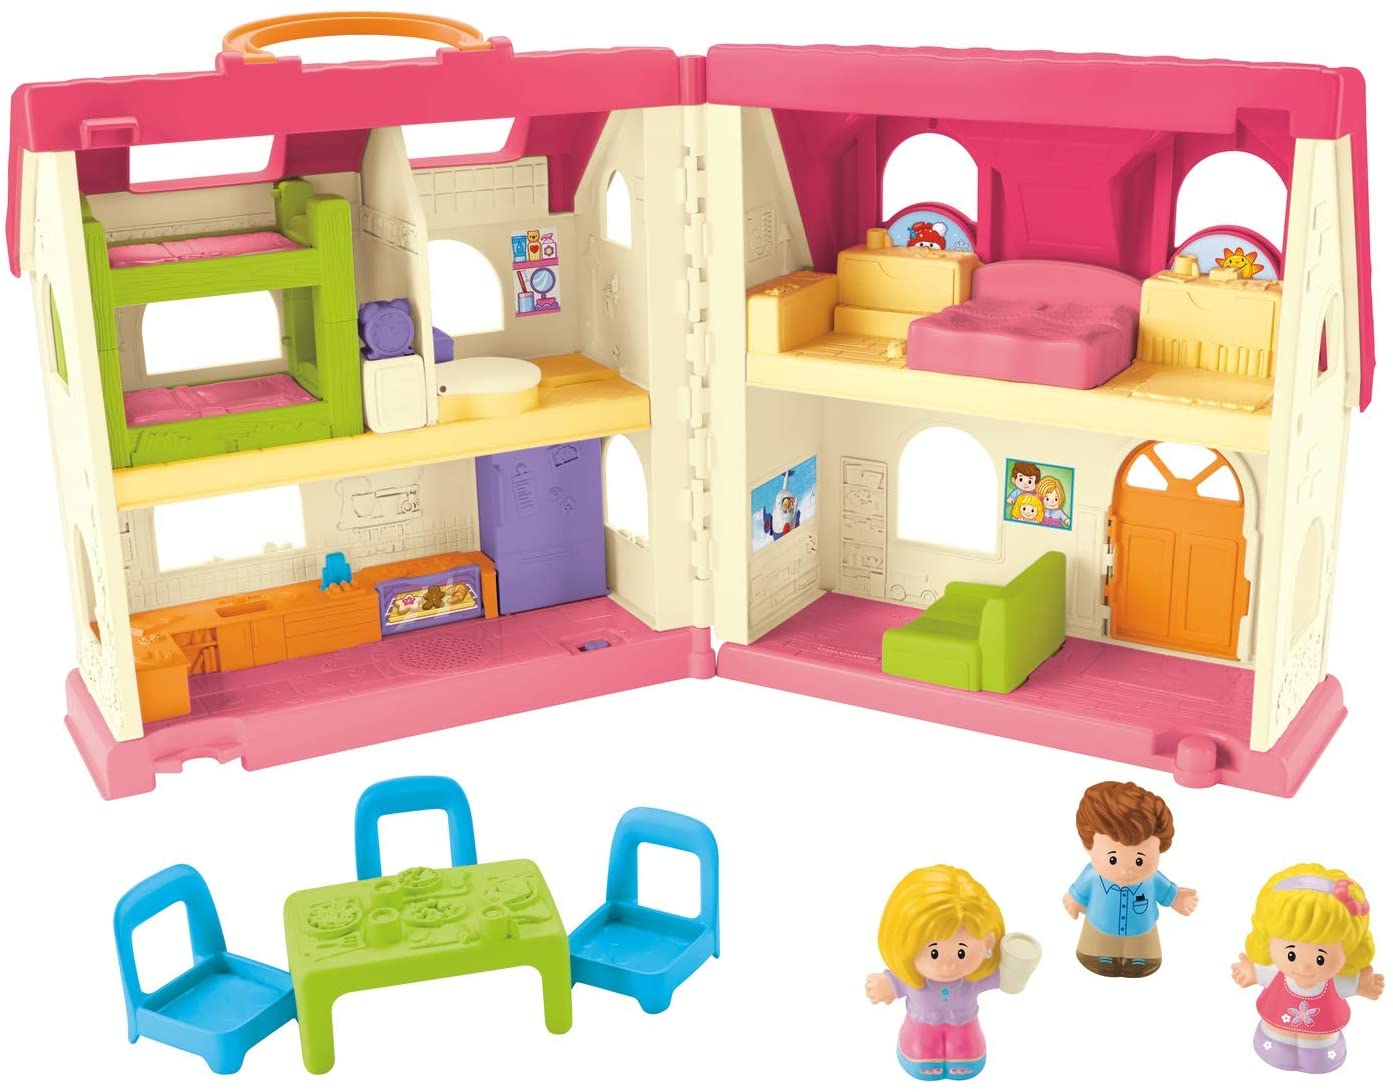 9 Best Fisher Price Dollhouse Reviews of 2022 2